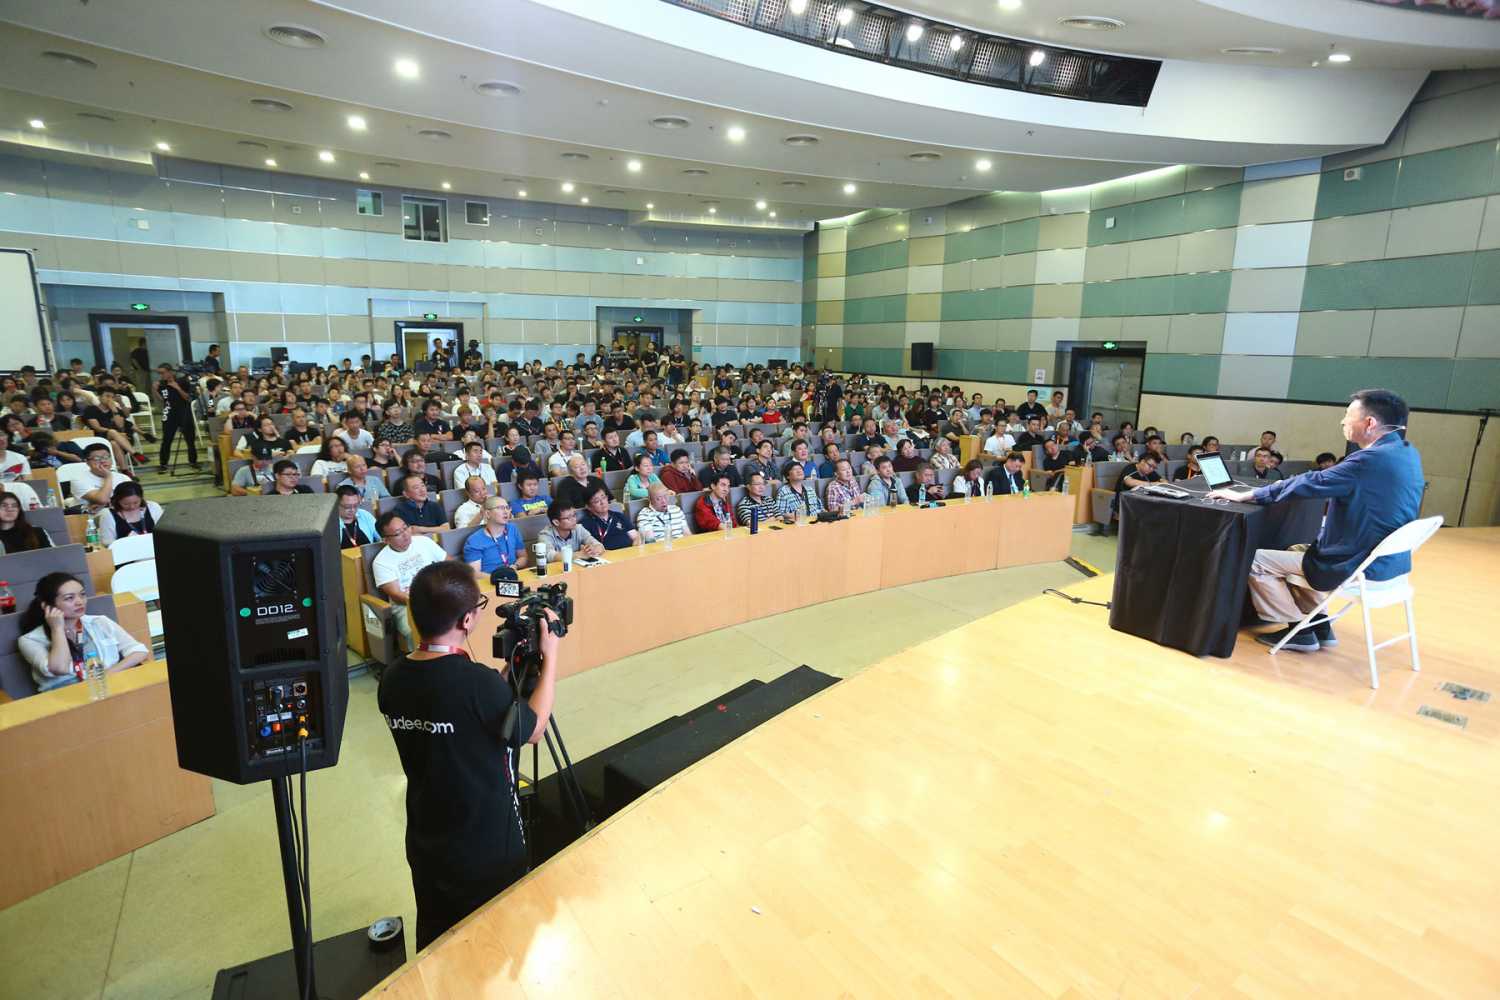 The event has grown to become one of the biggest in China for those in the recording industry